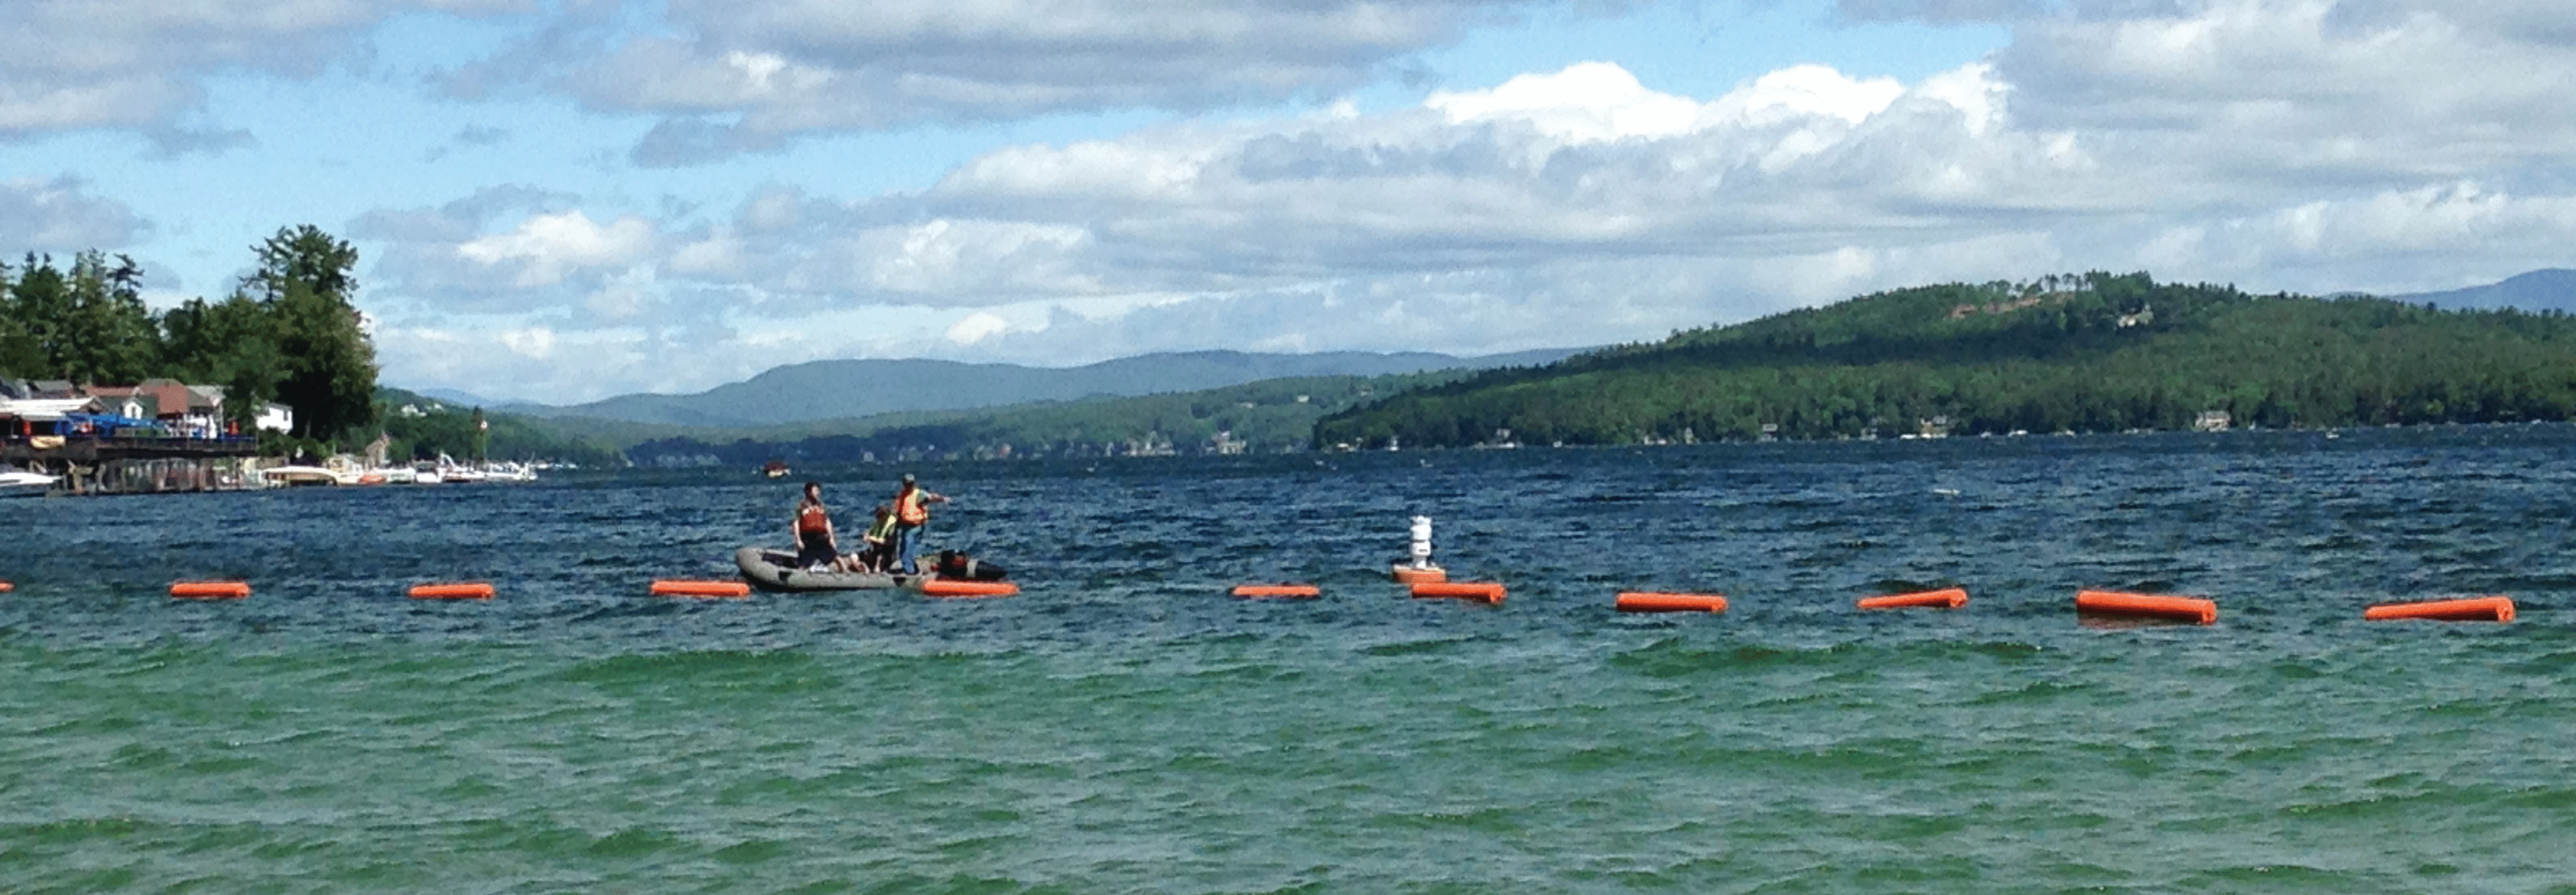 Photograph of buoys stretched across a section of Lake Winnipesaukee.